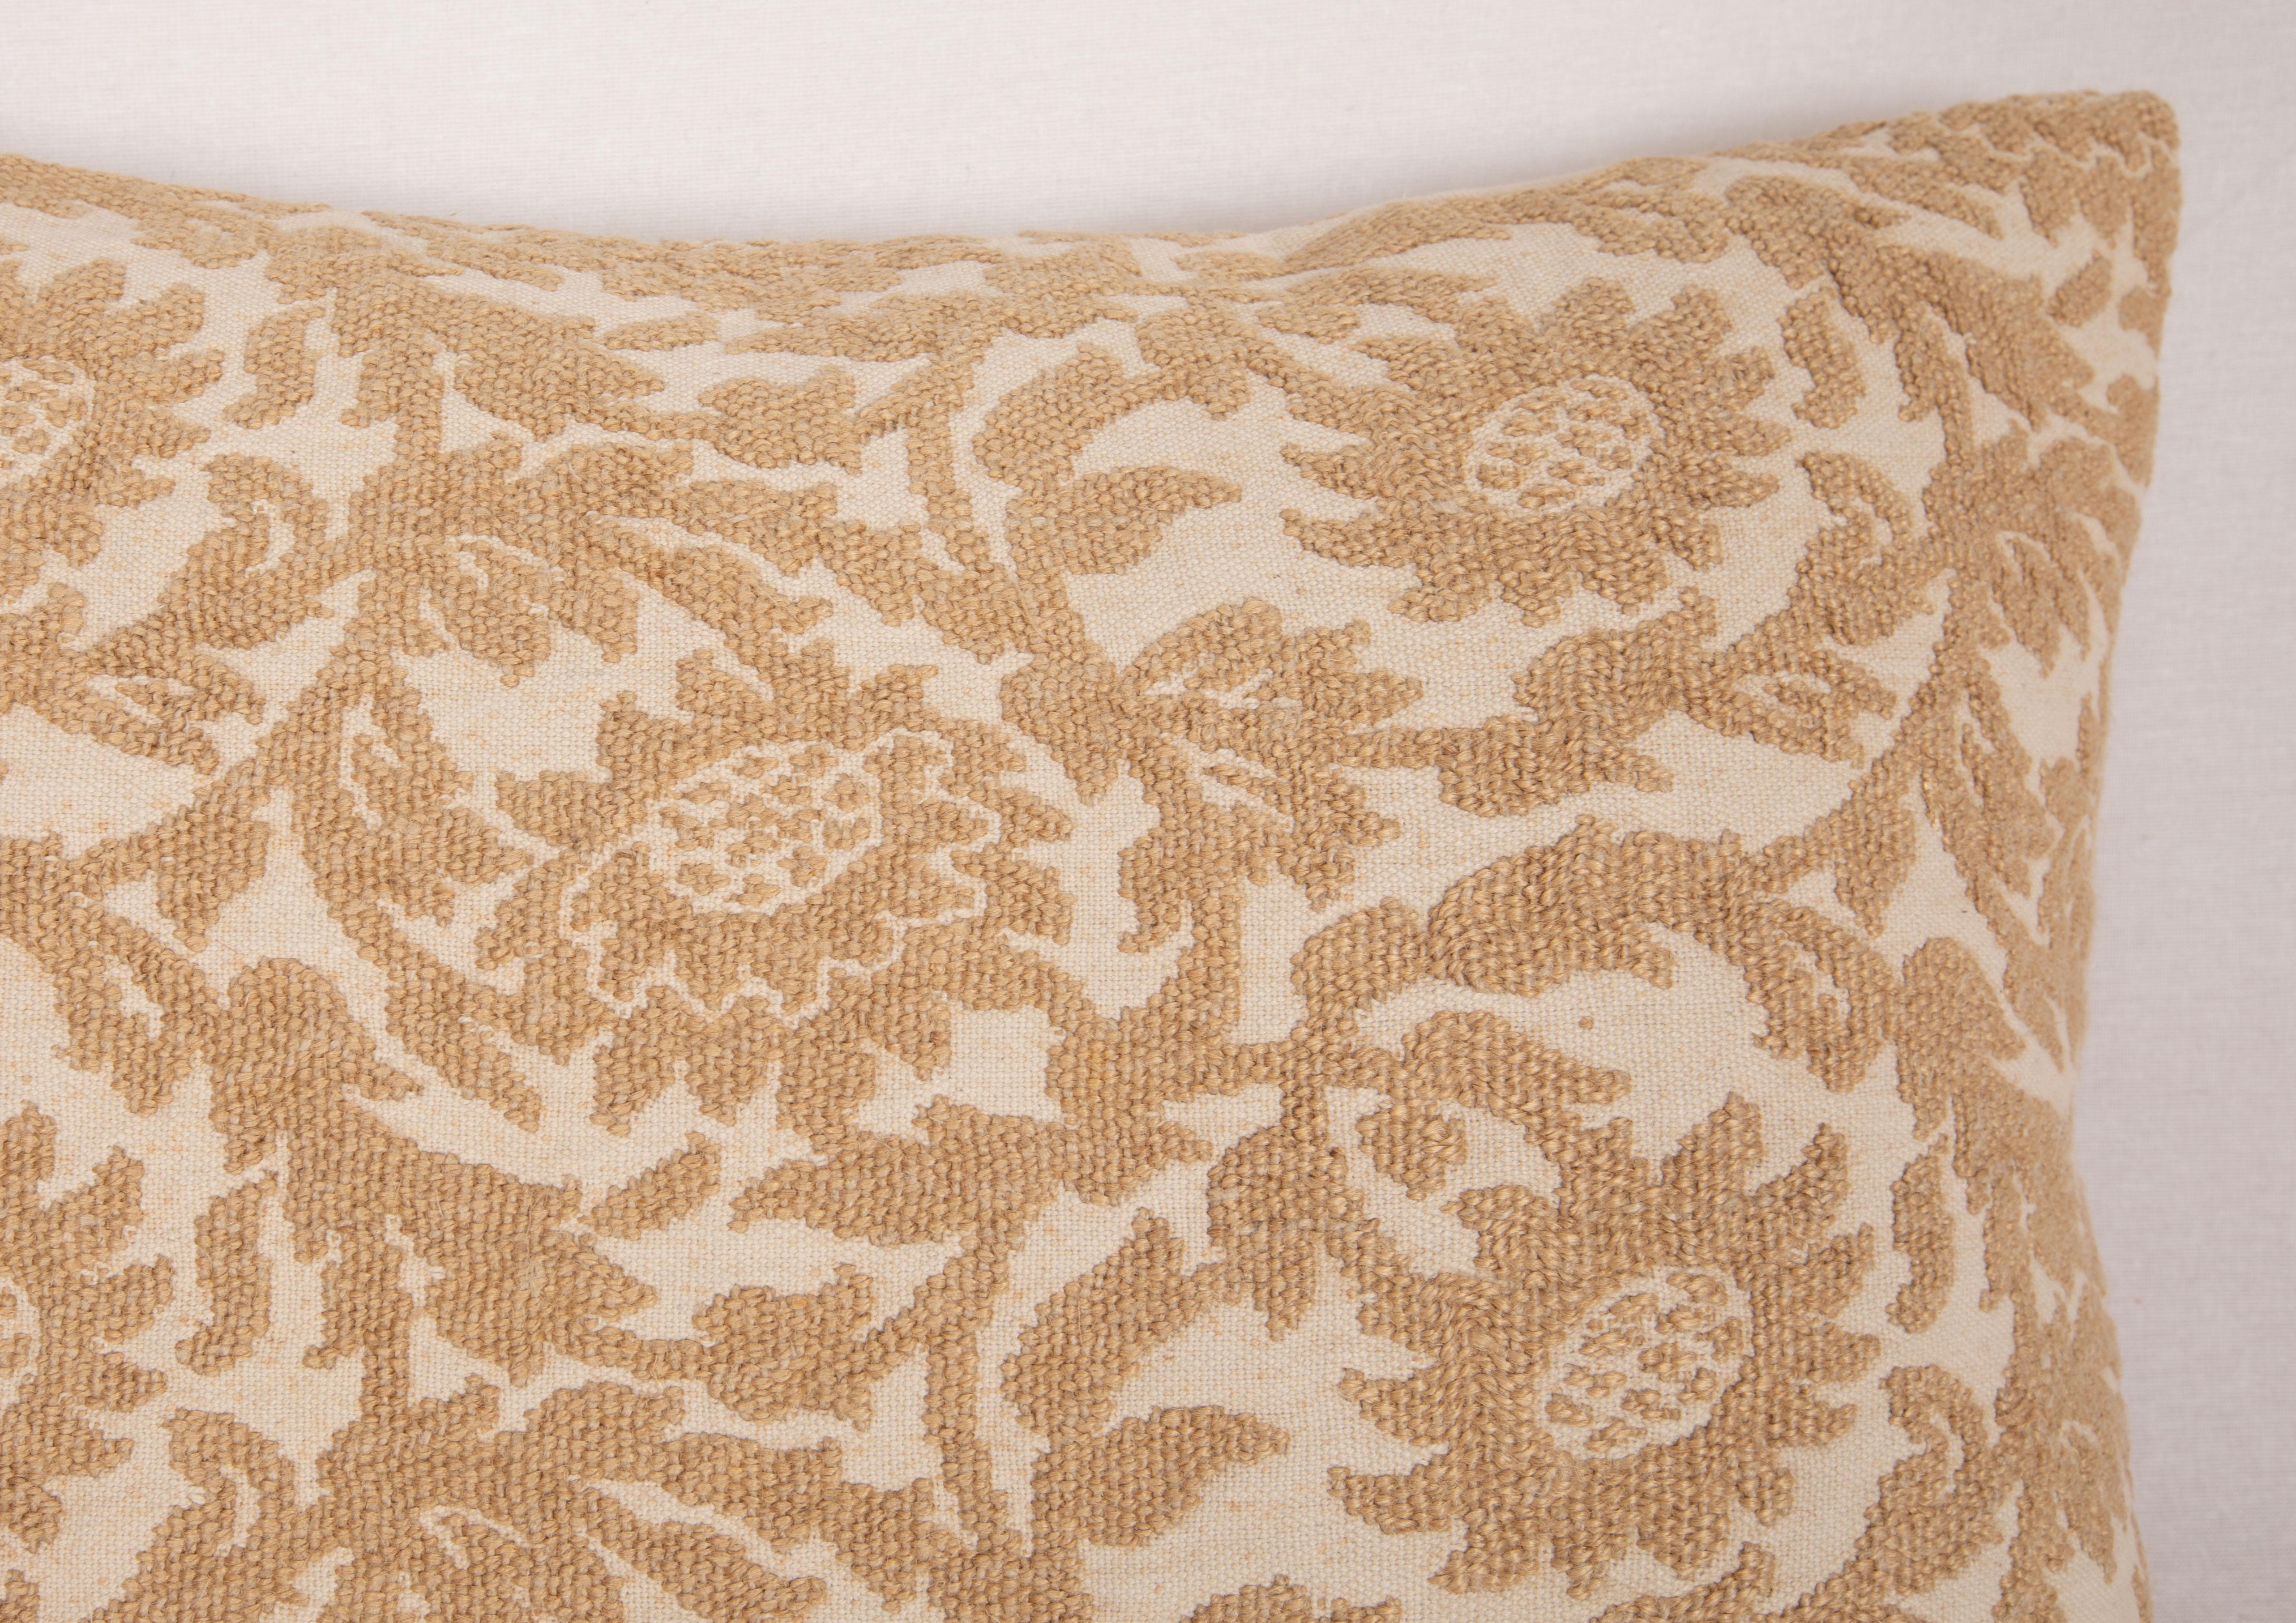 Embroidered Pillowcase made from an antique European embroidery, Early 20th C. For Sale